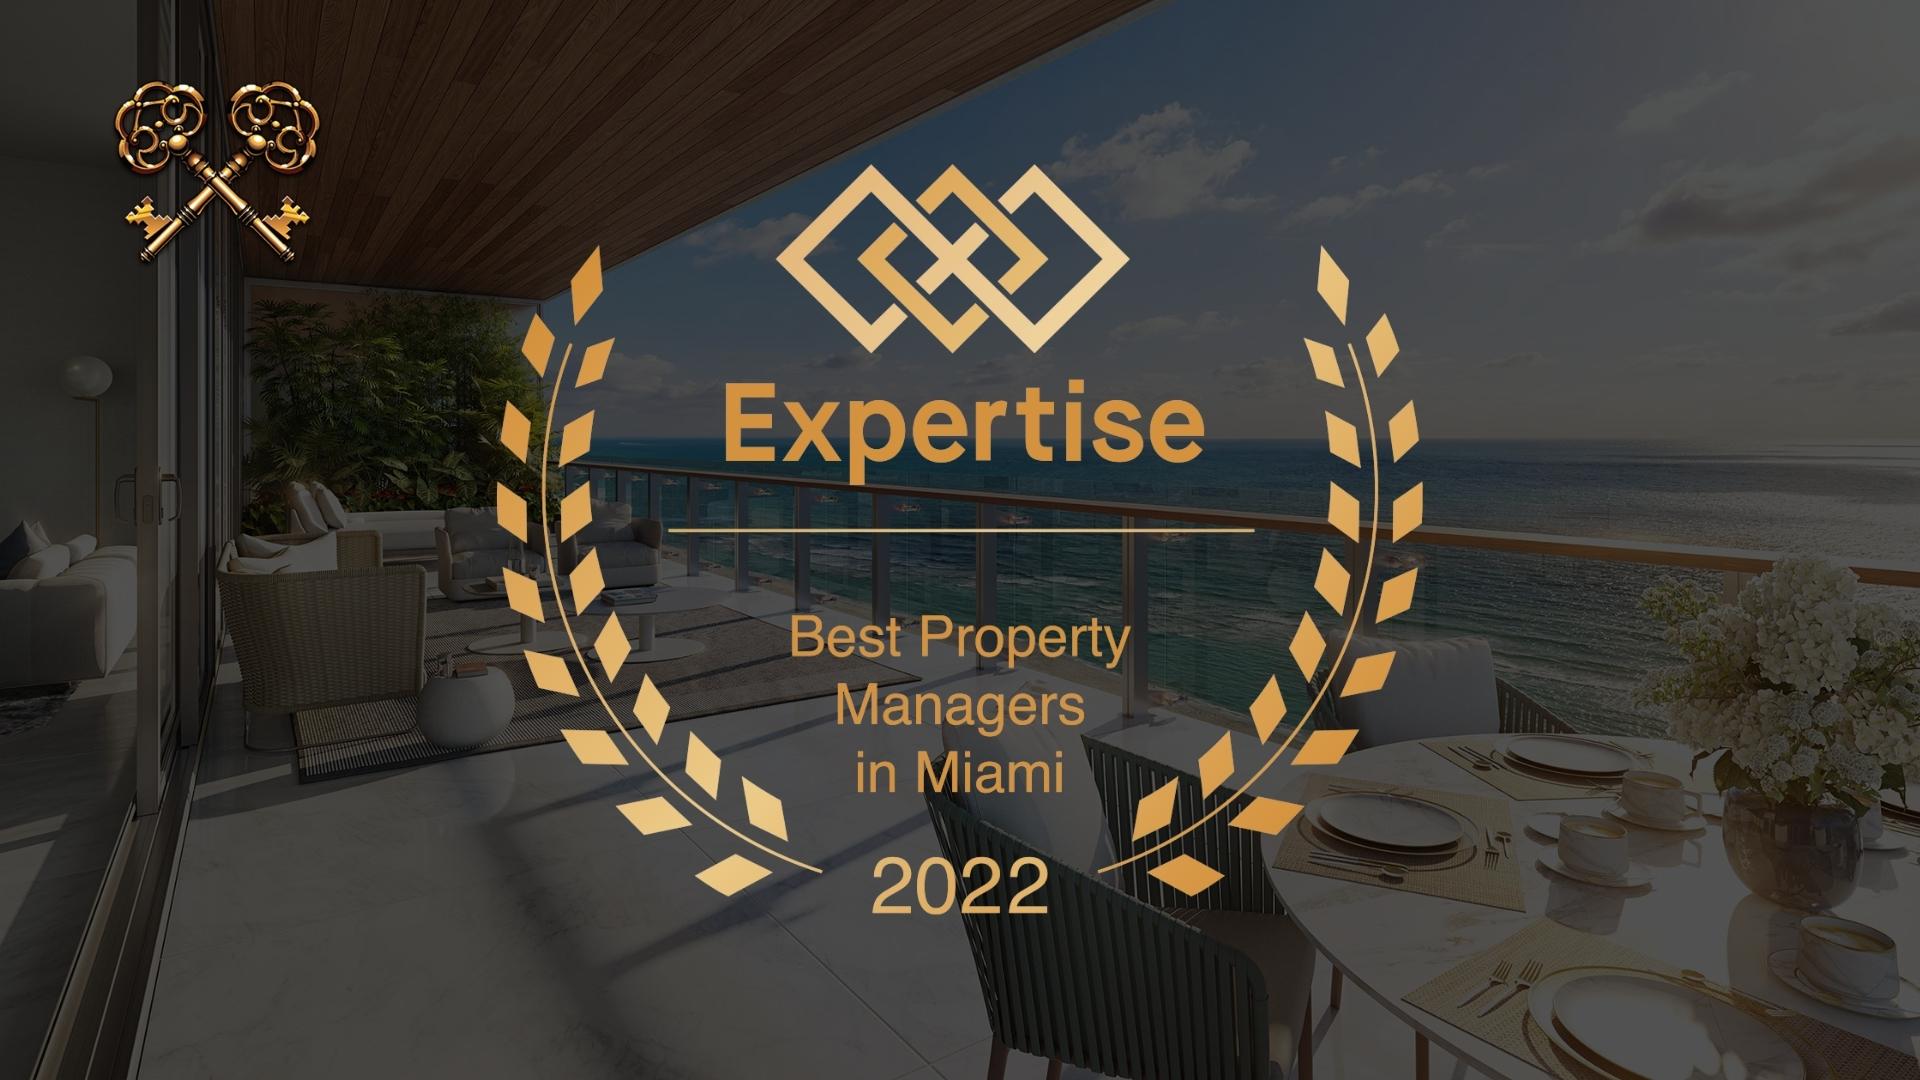 Best Property Managers in Miami in 2022!